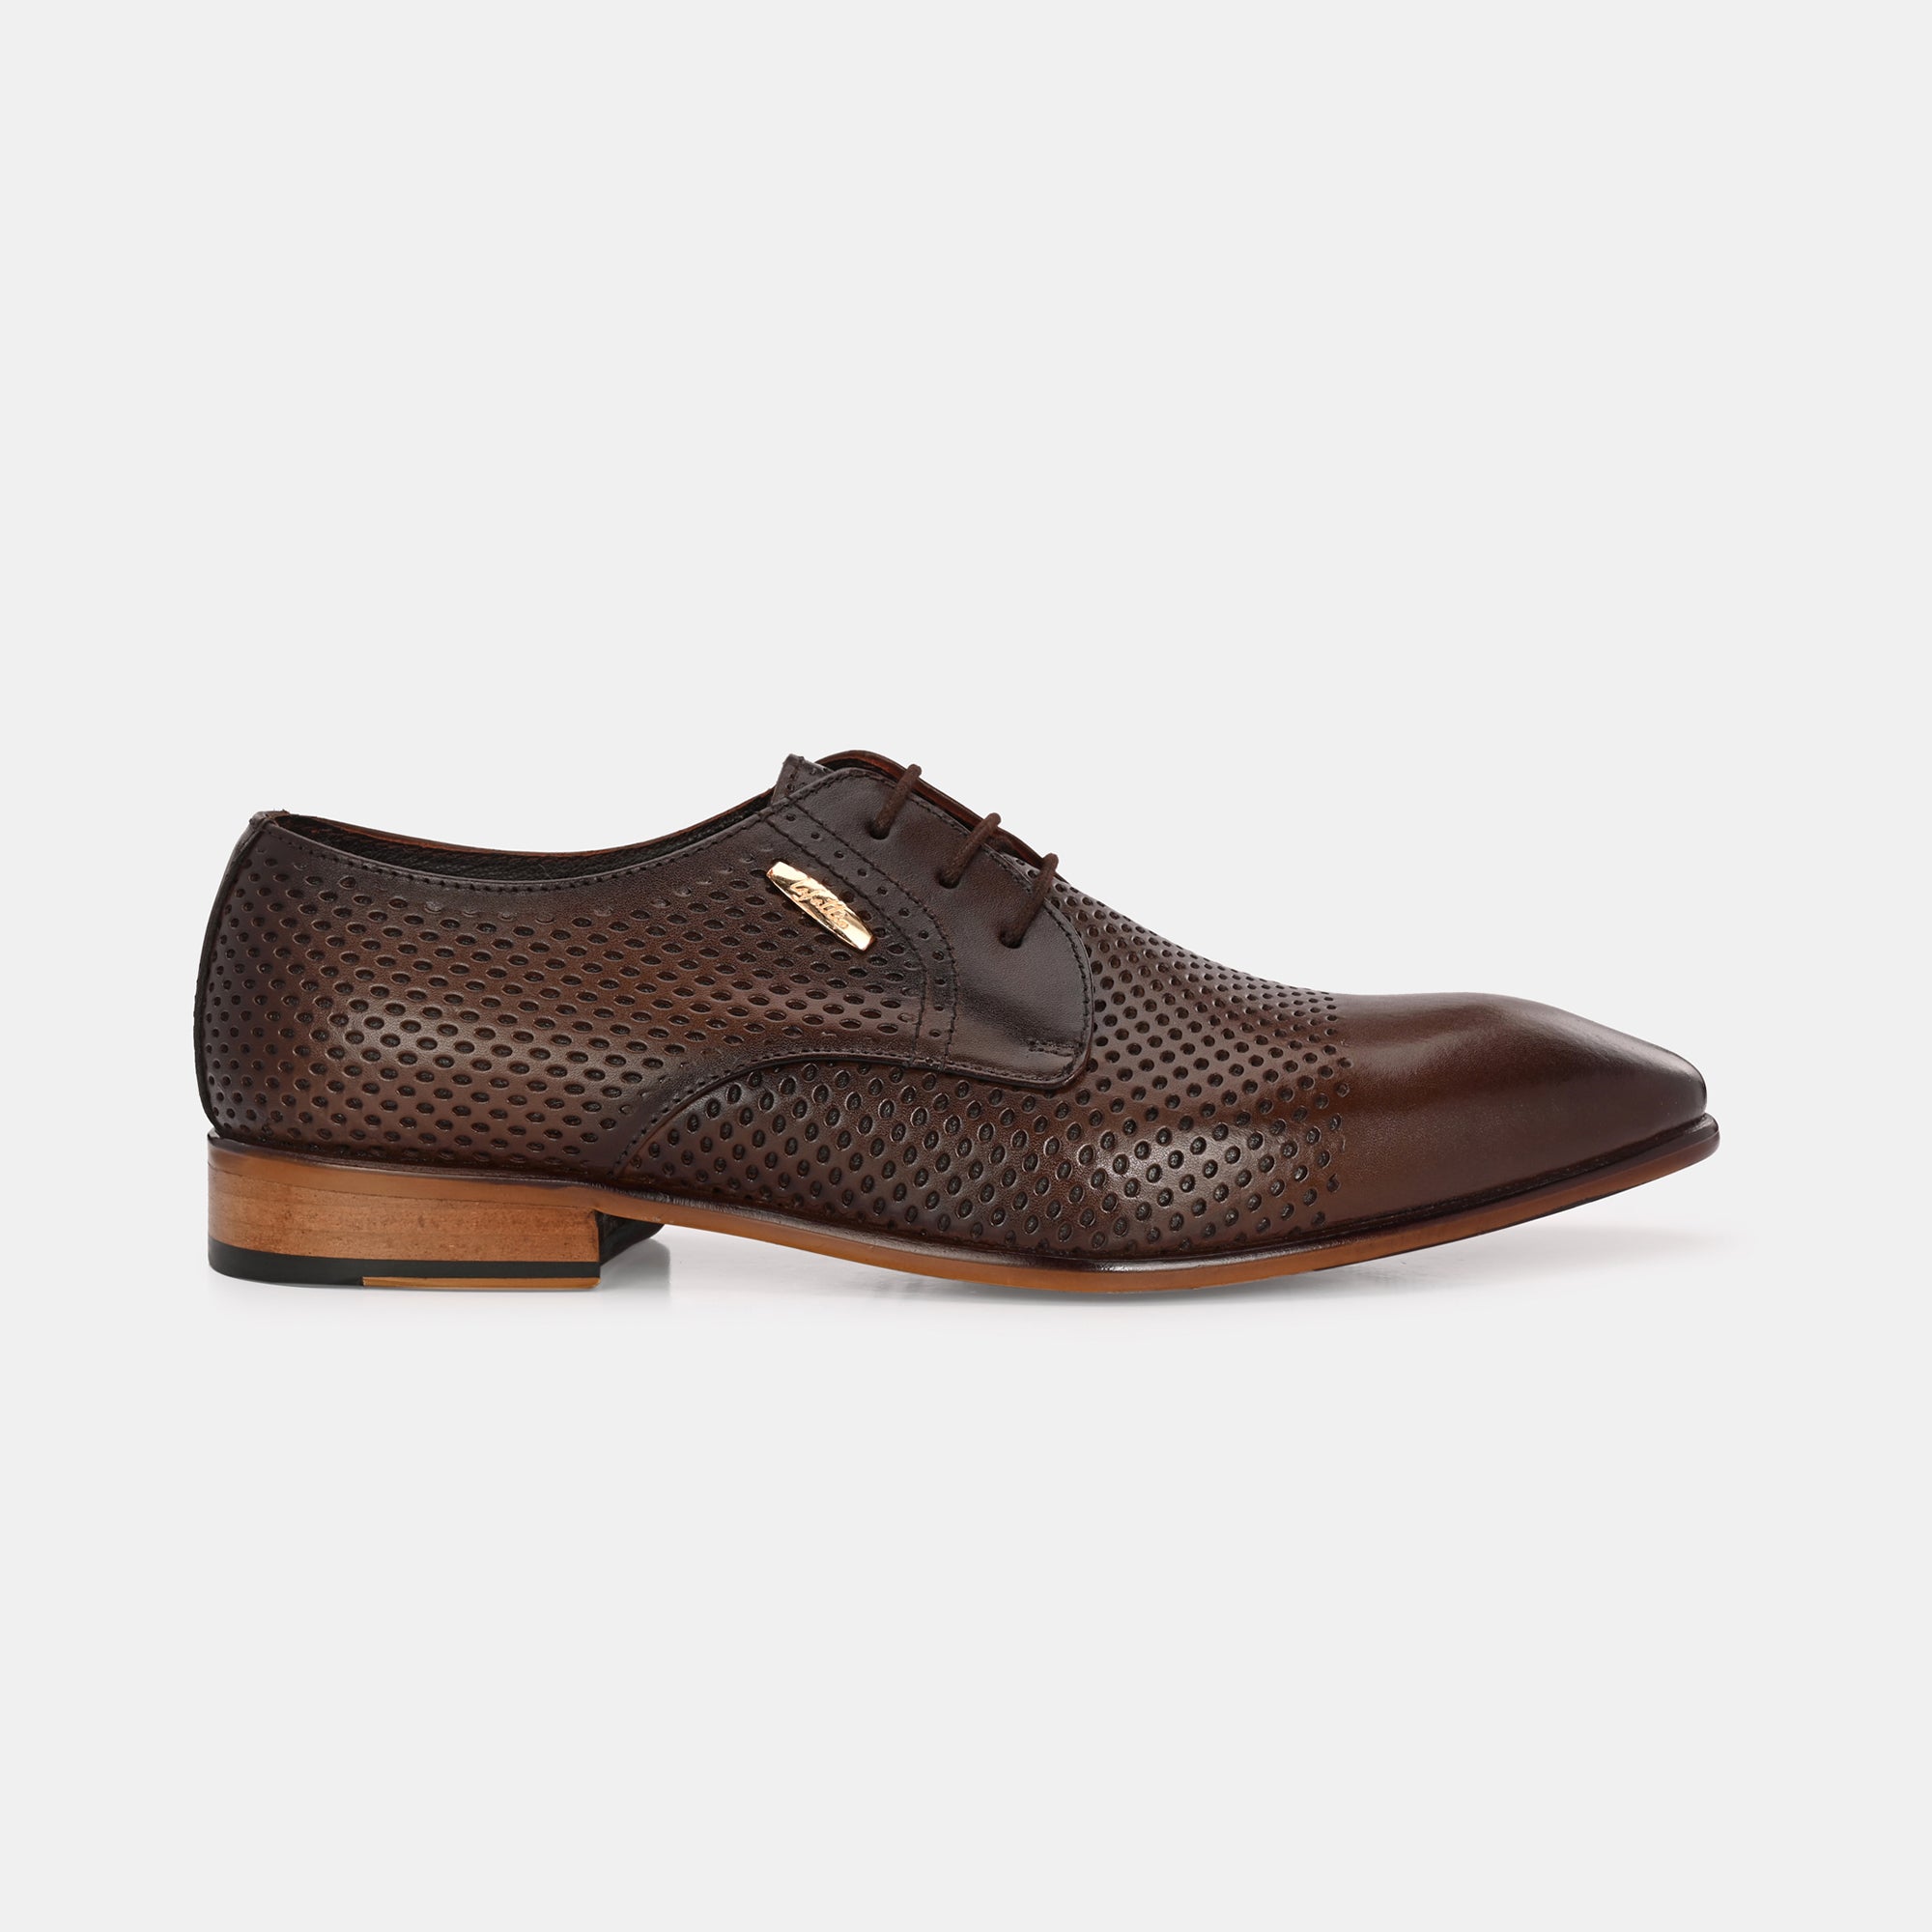 Brown Perforated Lace-Up Shoes by Lafattio